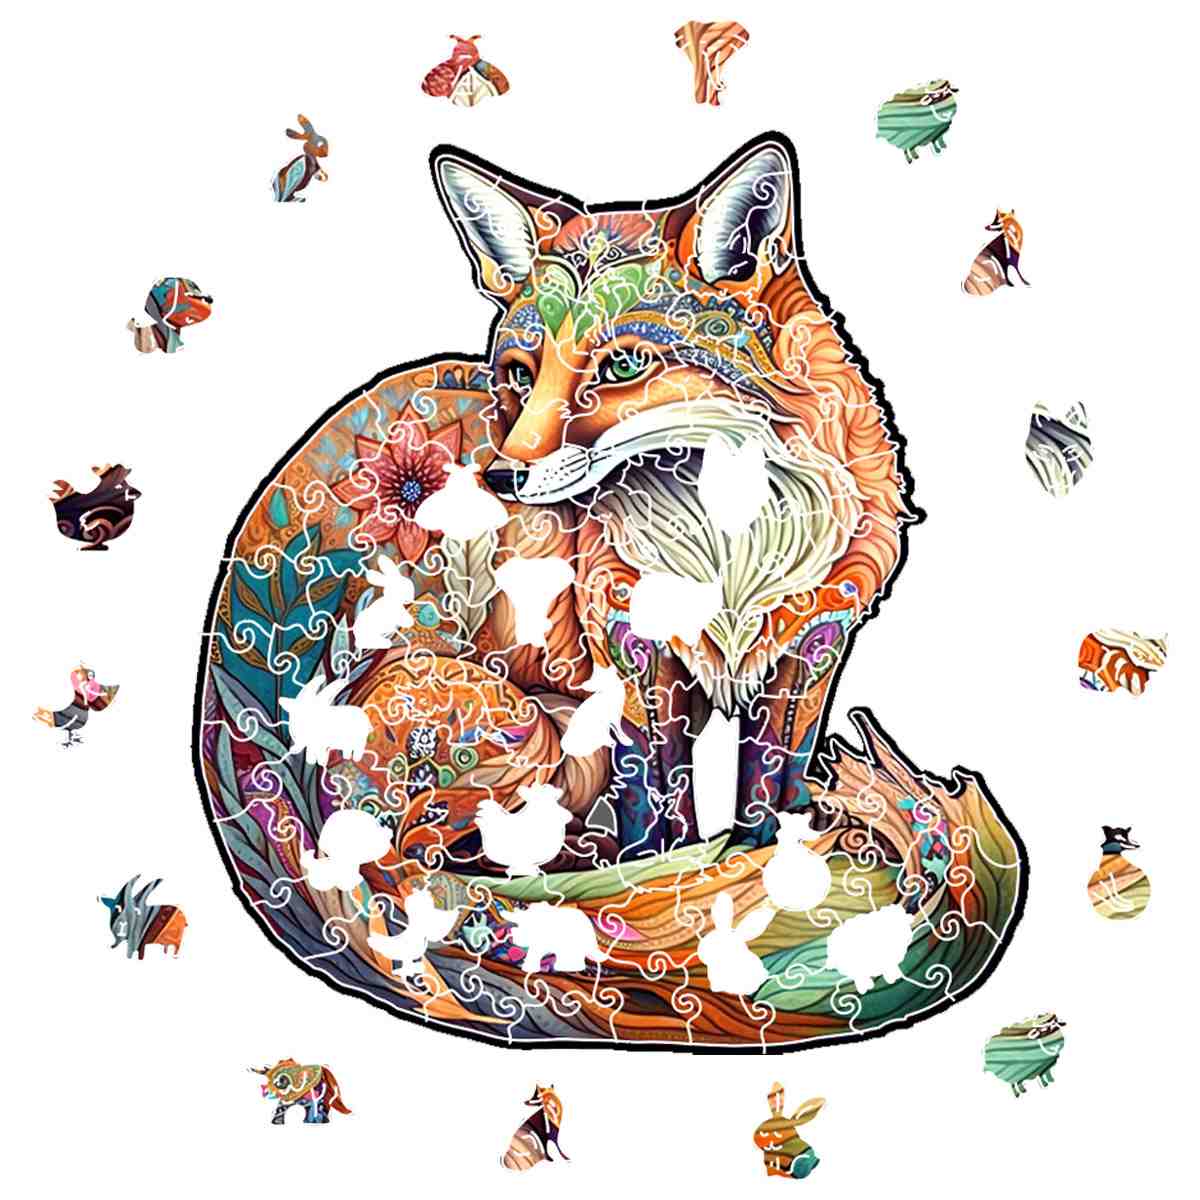 Animal Jigsaw Puzzle > Wooden Jigsaw Puzzle > Jigsaw Puzzle Sly Fox - Jigsaw Puzzle